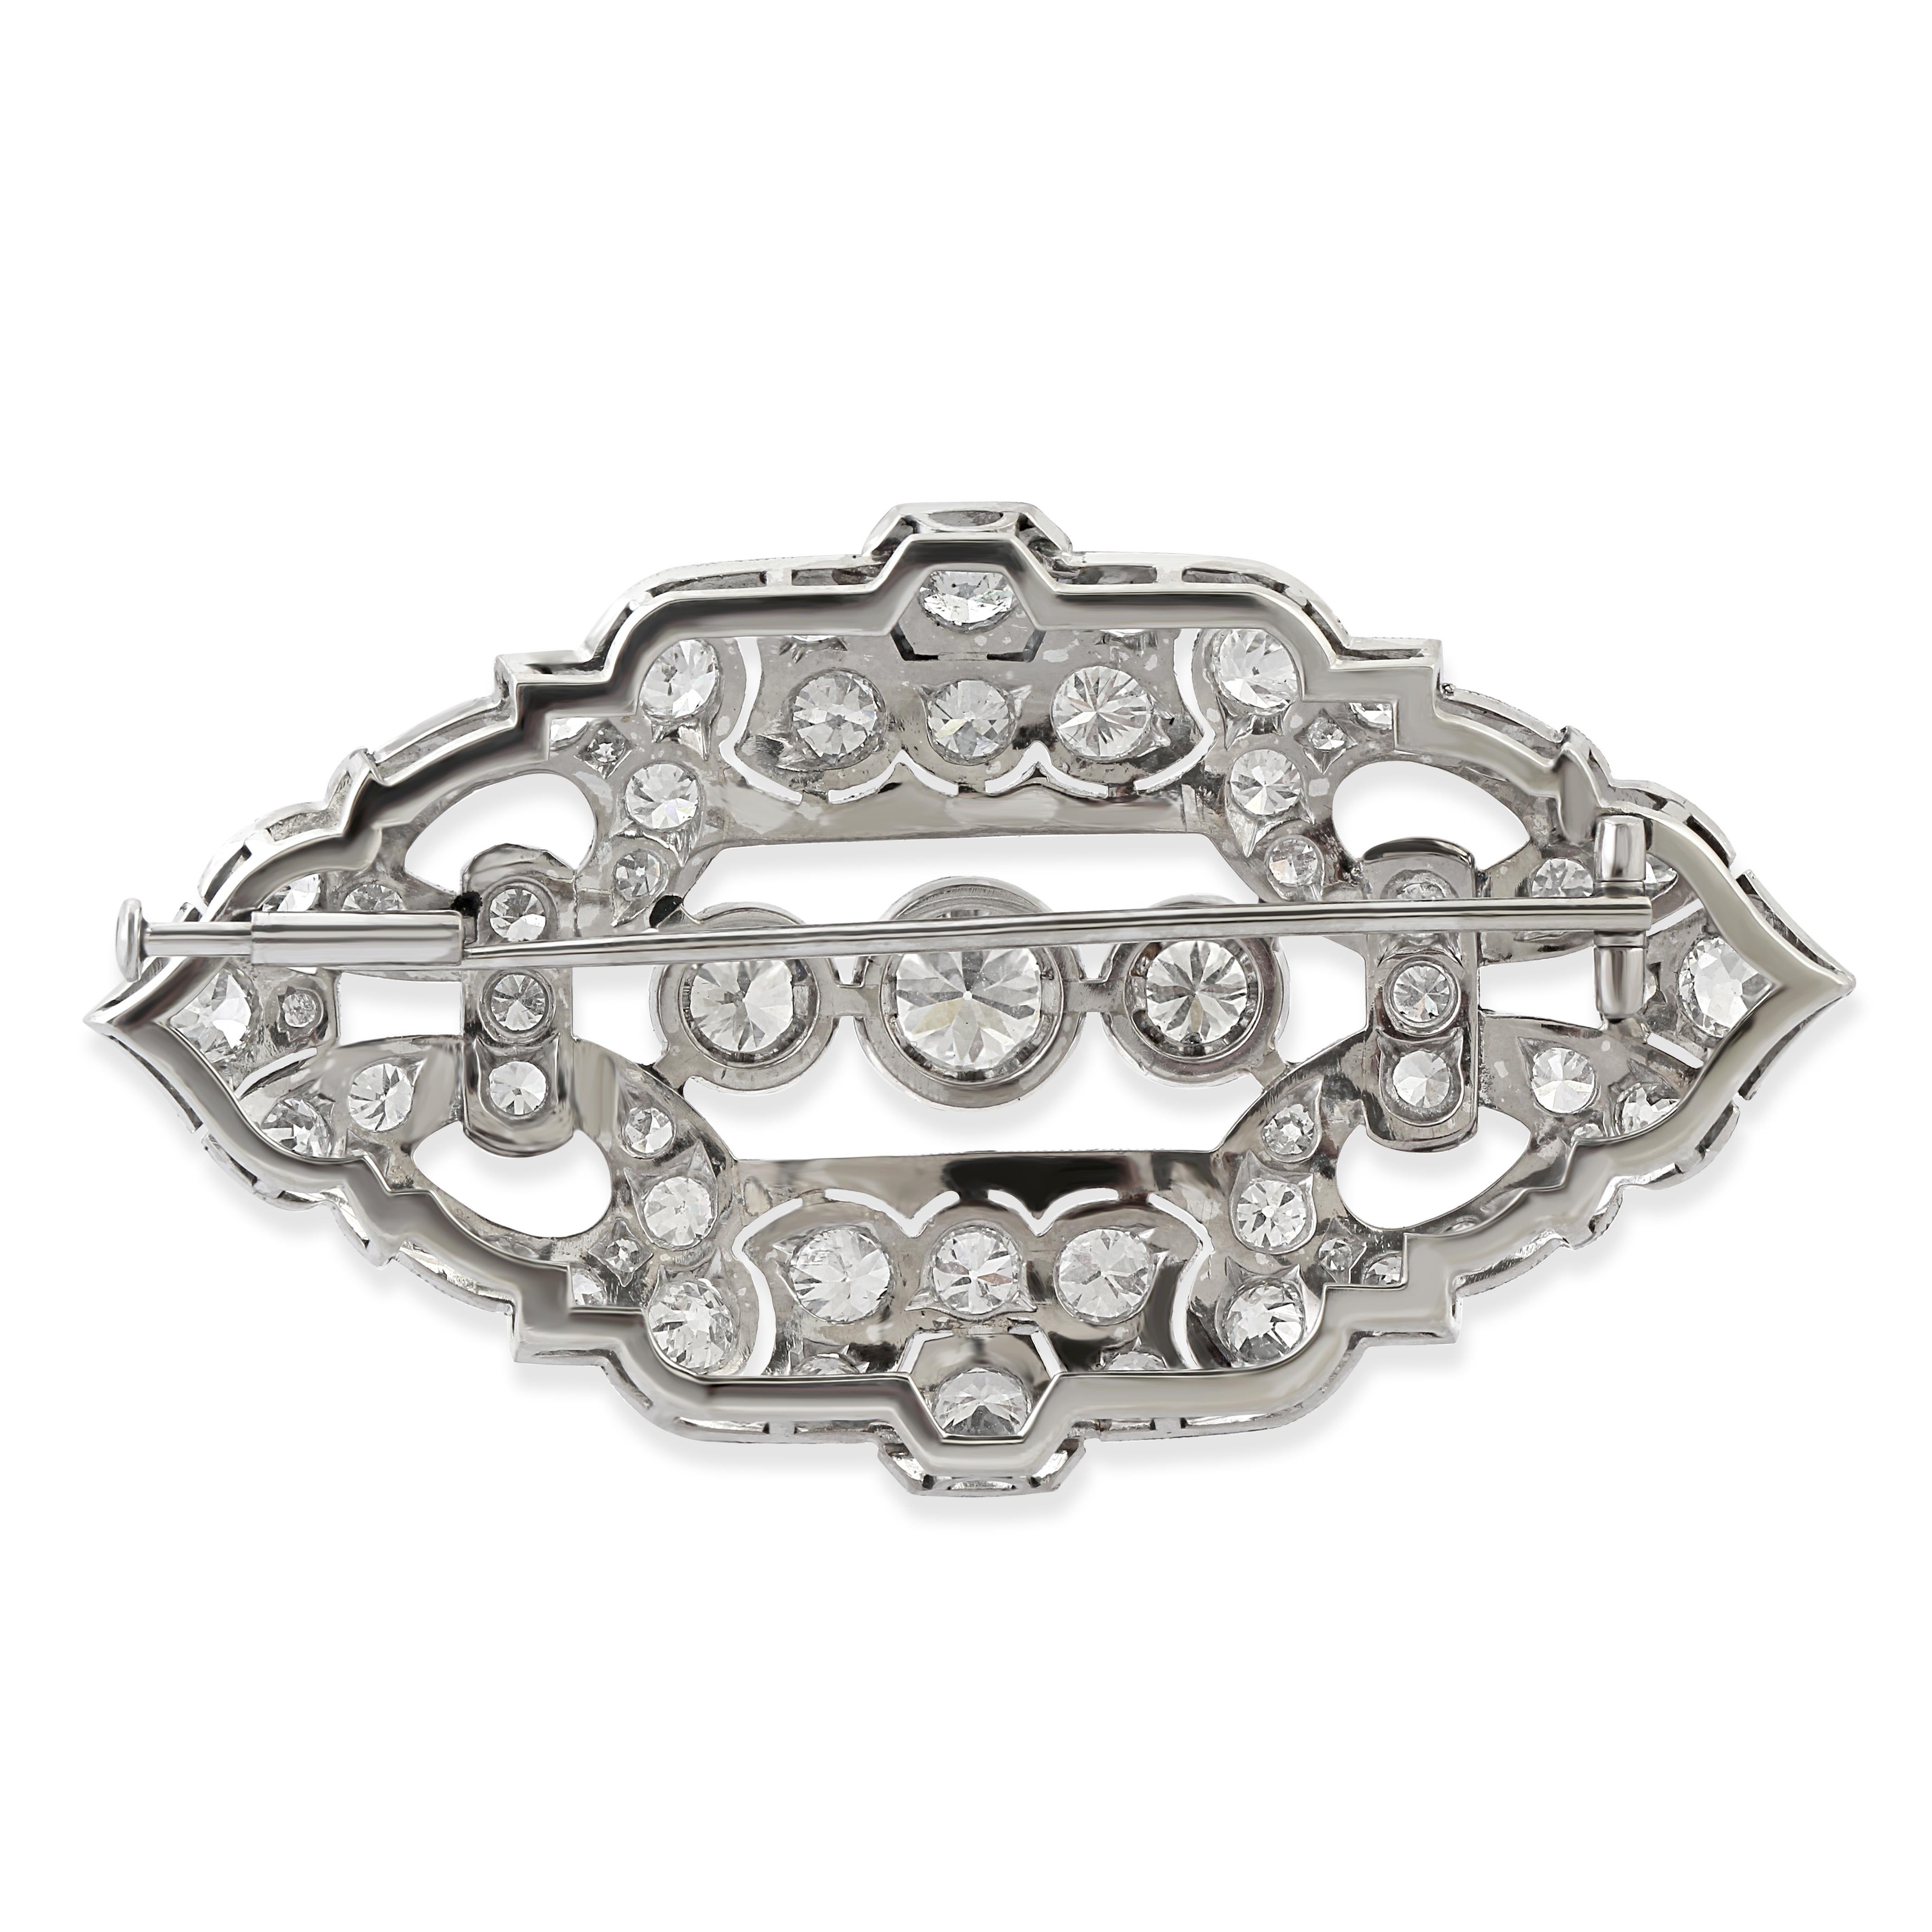 A 1920s openwork oval marquise shape diamond brooch set at the centre with three circle cut diamonds.
